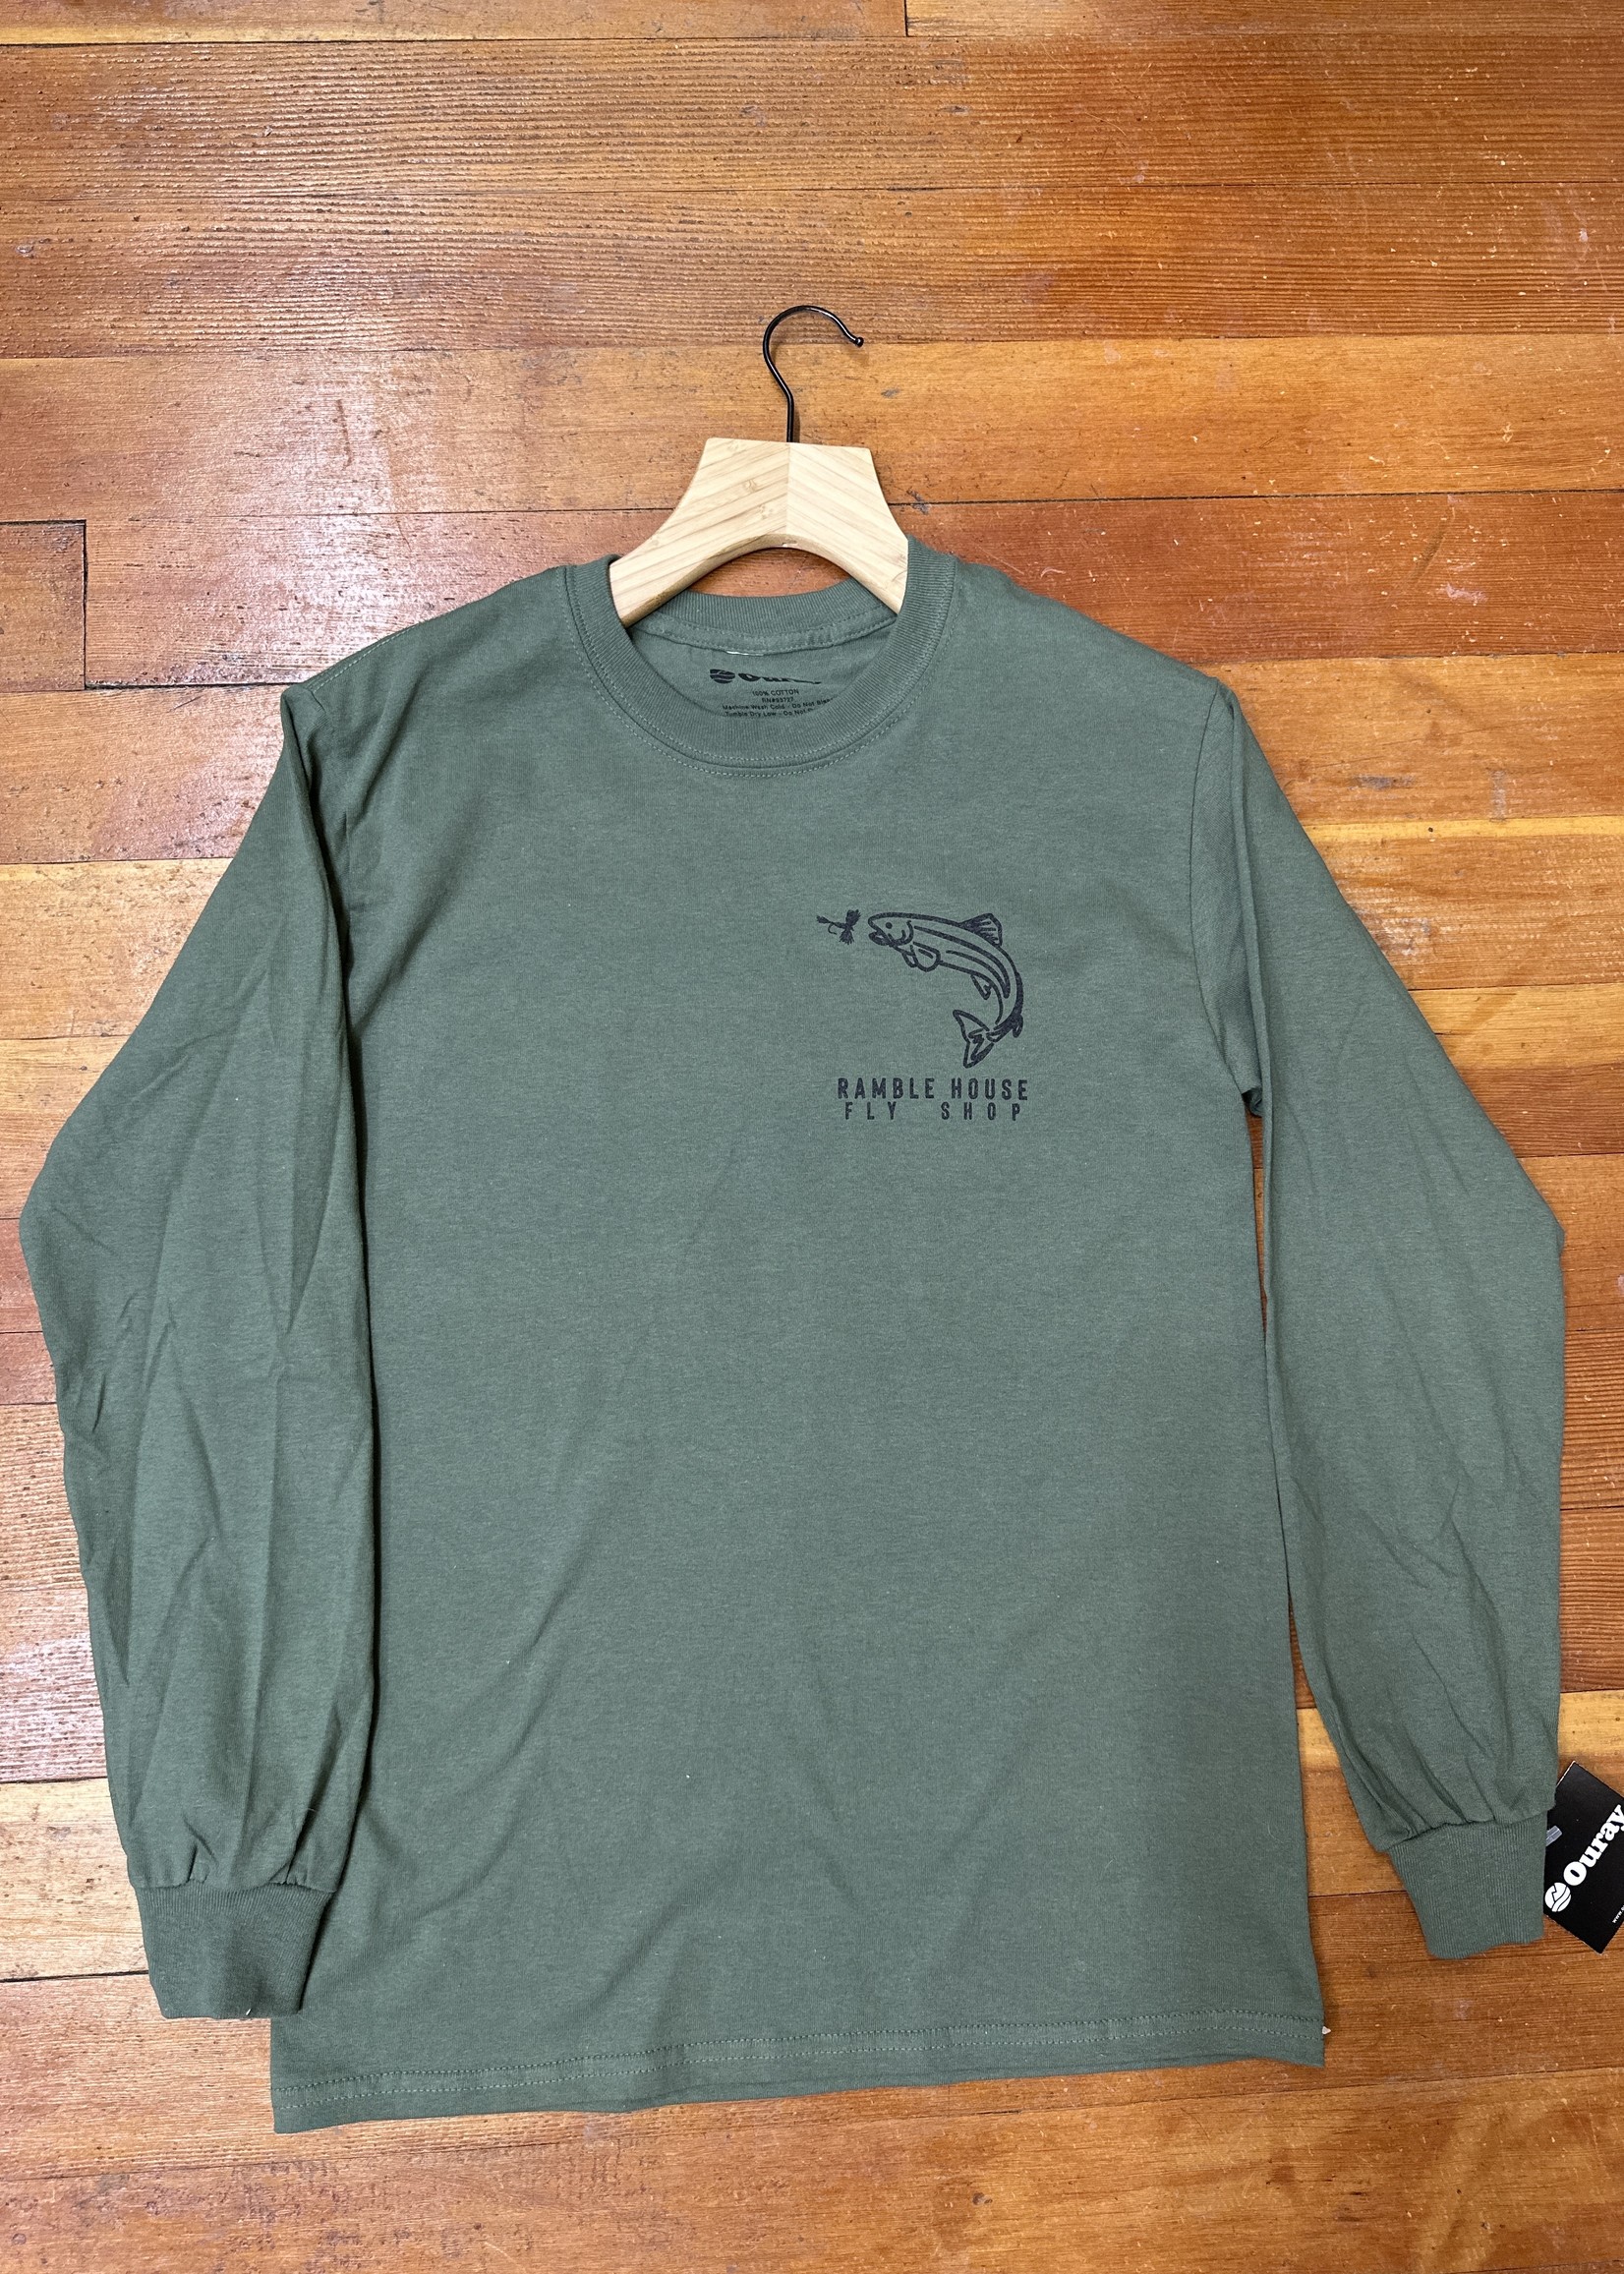 Ouray Ouray L/S T Military Green Ramble House/Rio Grande Cutthroat